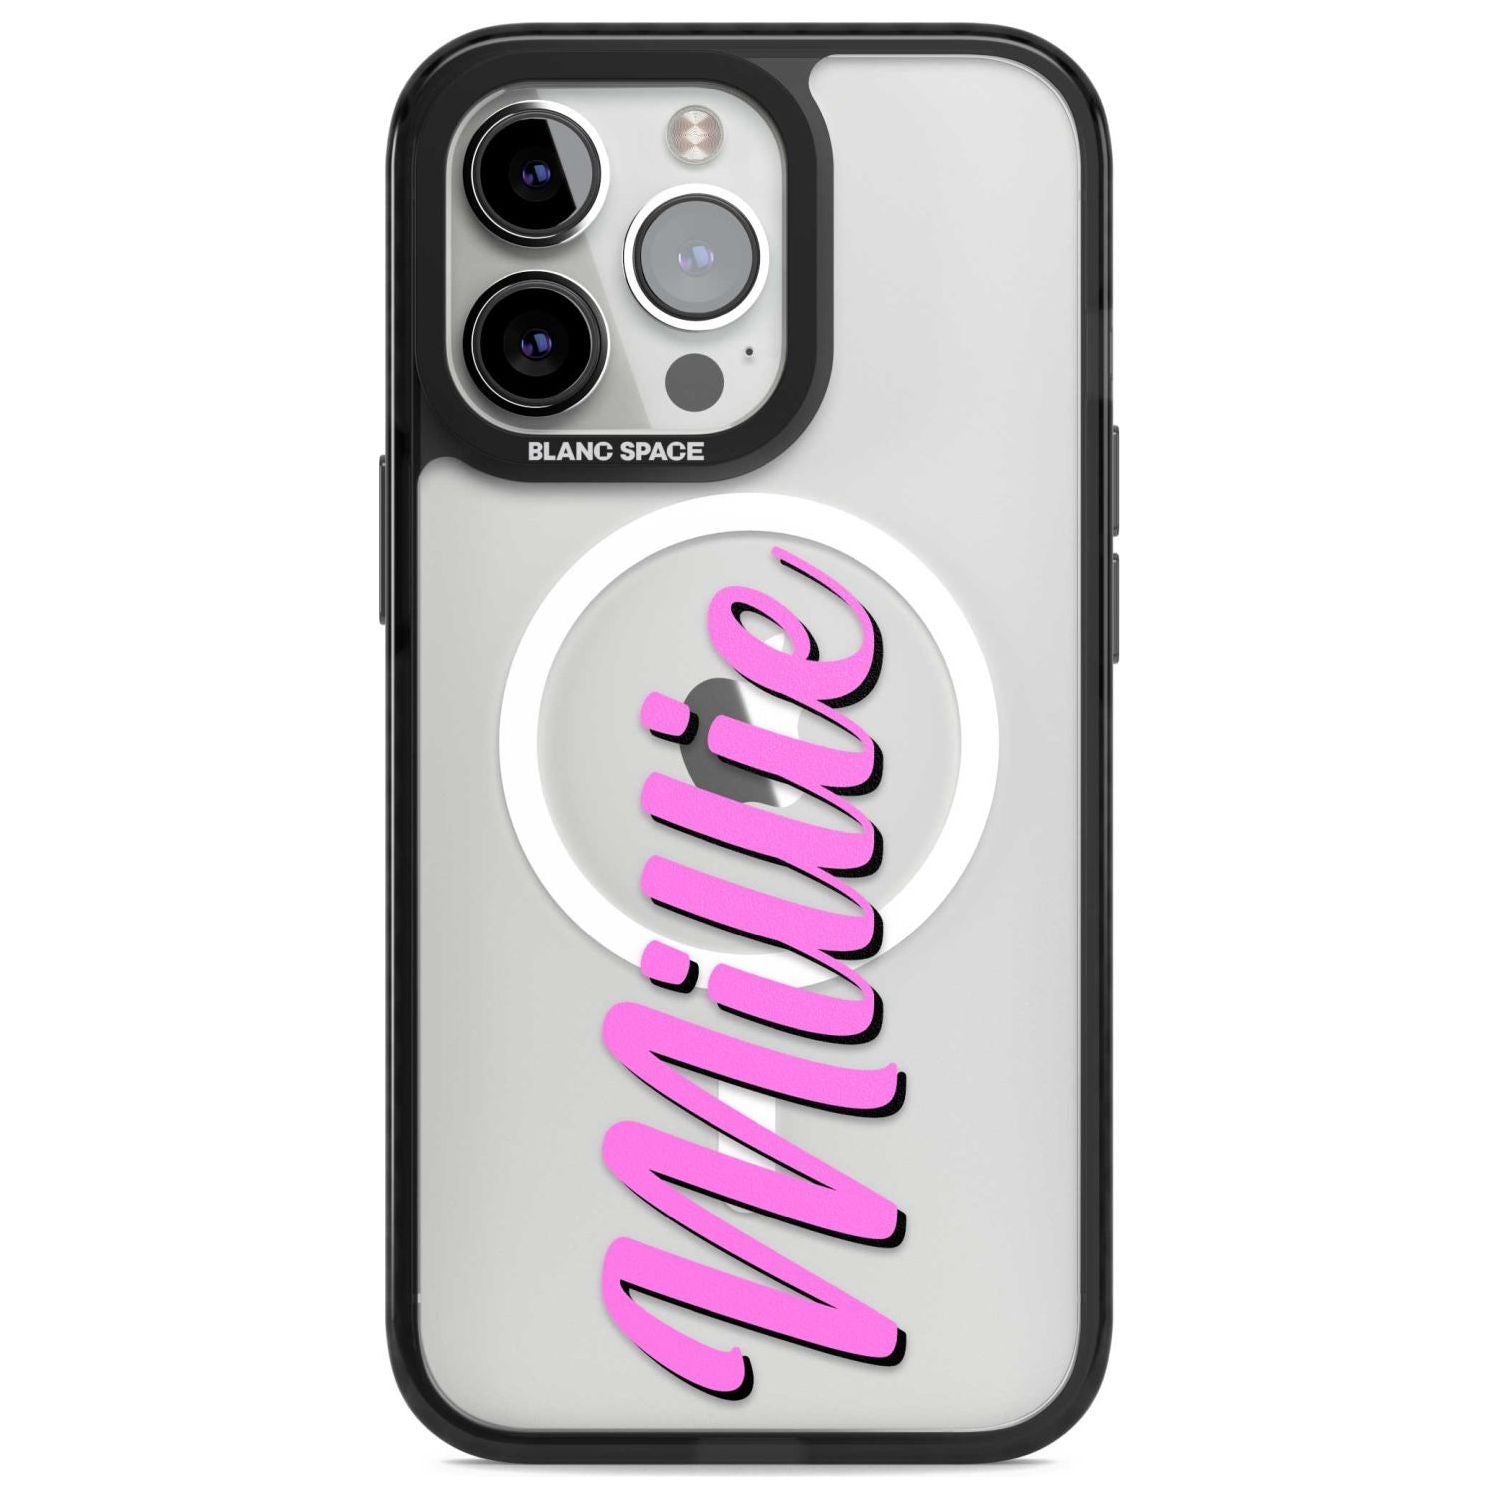 Personalised Clear Text  3C Custom Phone Case iPhone 15 Pro Max / Magsafe Black Impact Case,iPhone 15 Pro / Magsafe Black Impact Case,iPhone 14 Pro Max / Magsafe Black Impact Case,iPhone 14 Pro / Magsafe Black Impact Case,iPhone 13 Pro / Magsafe Black Impact Case Blanc Space